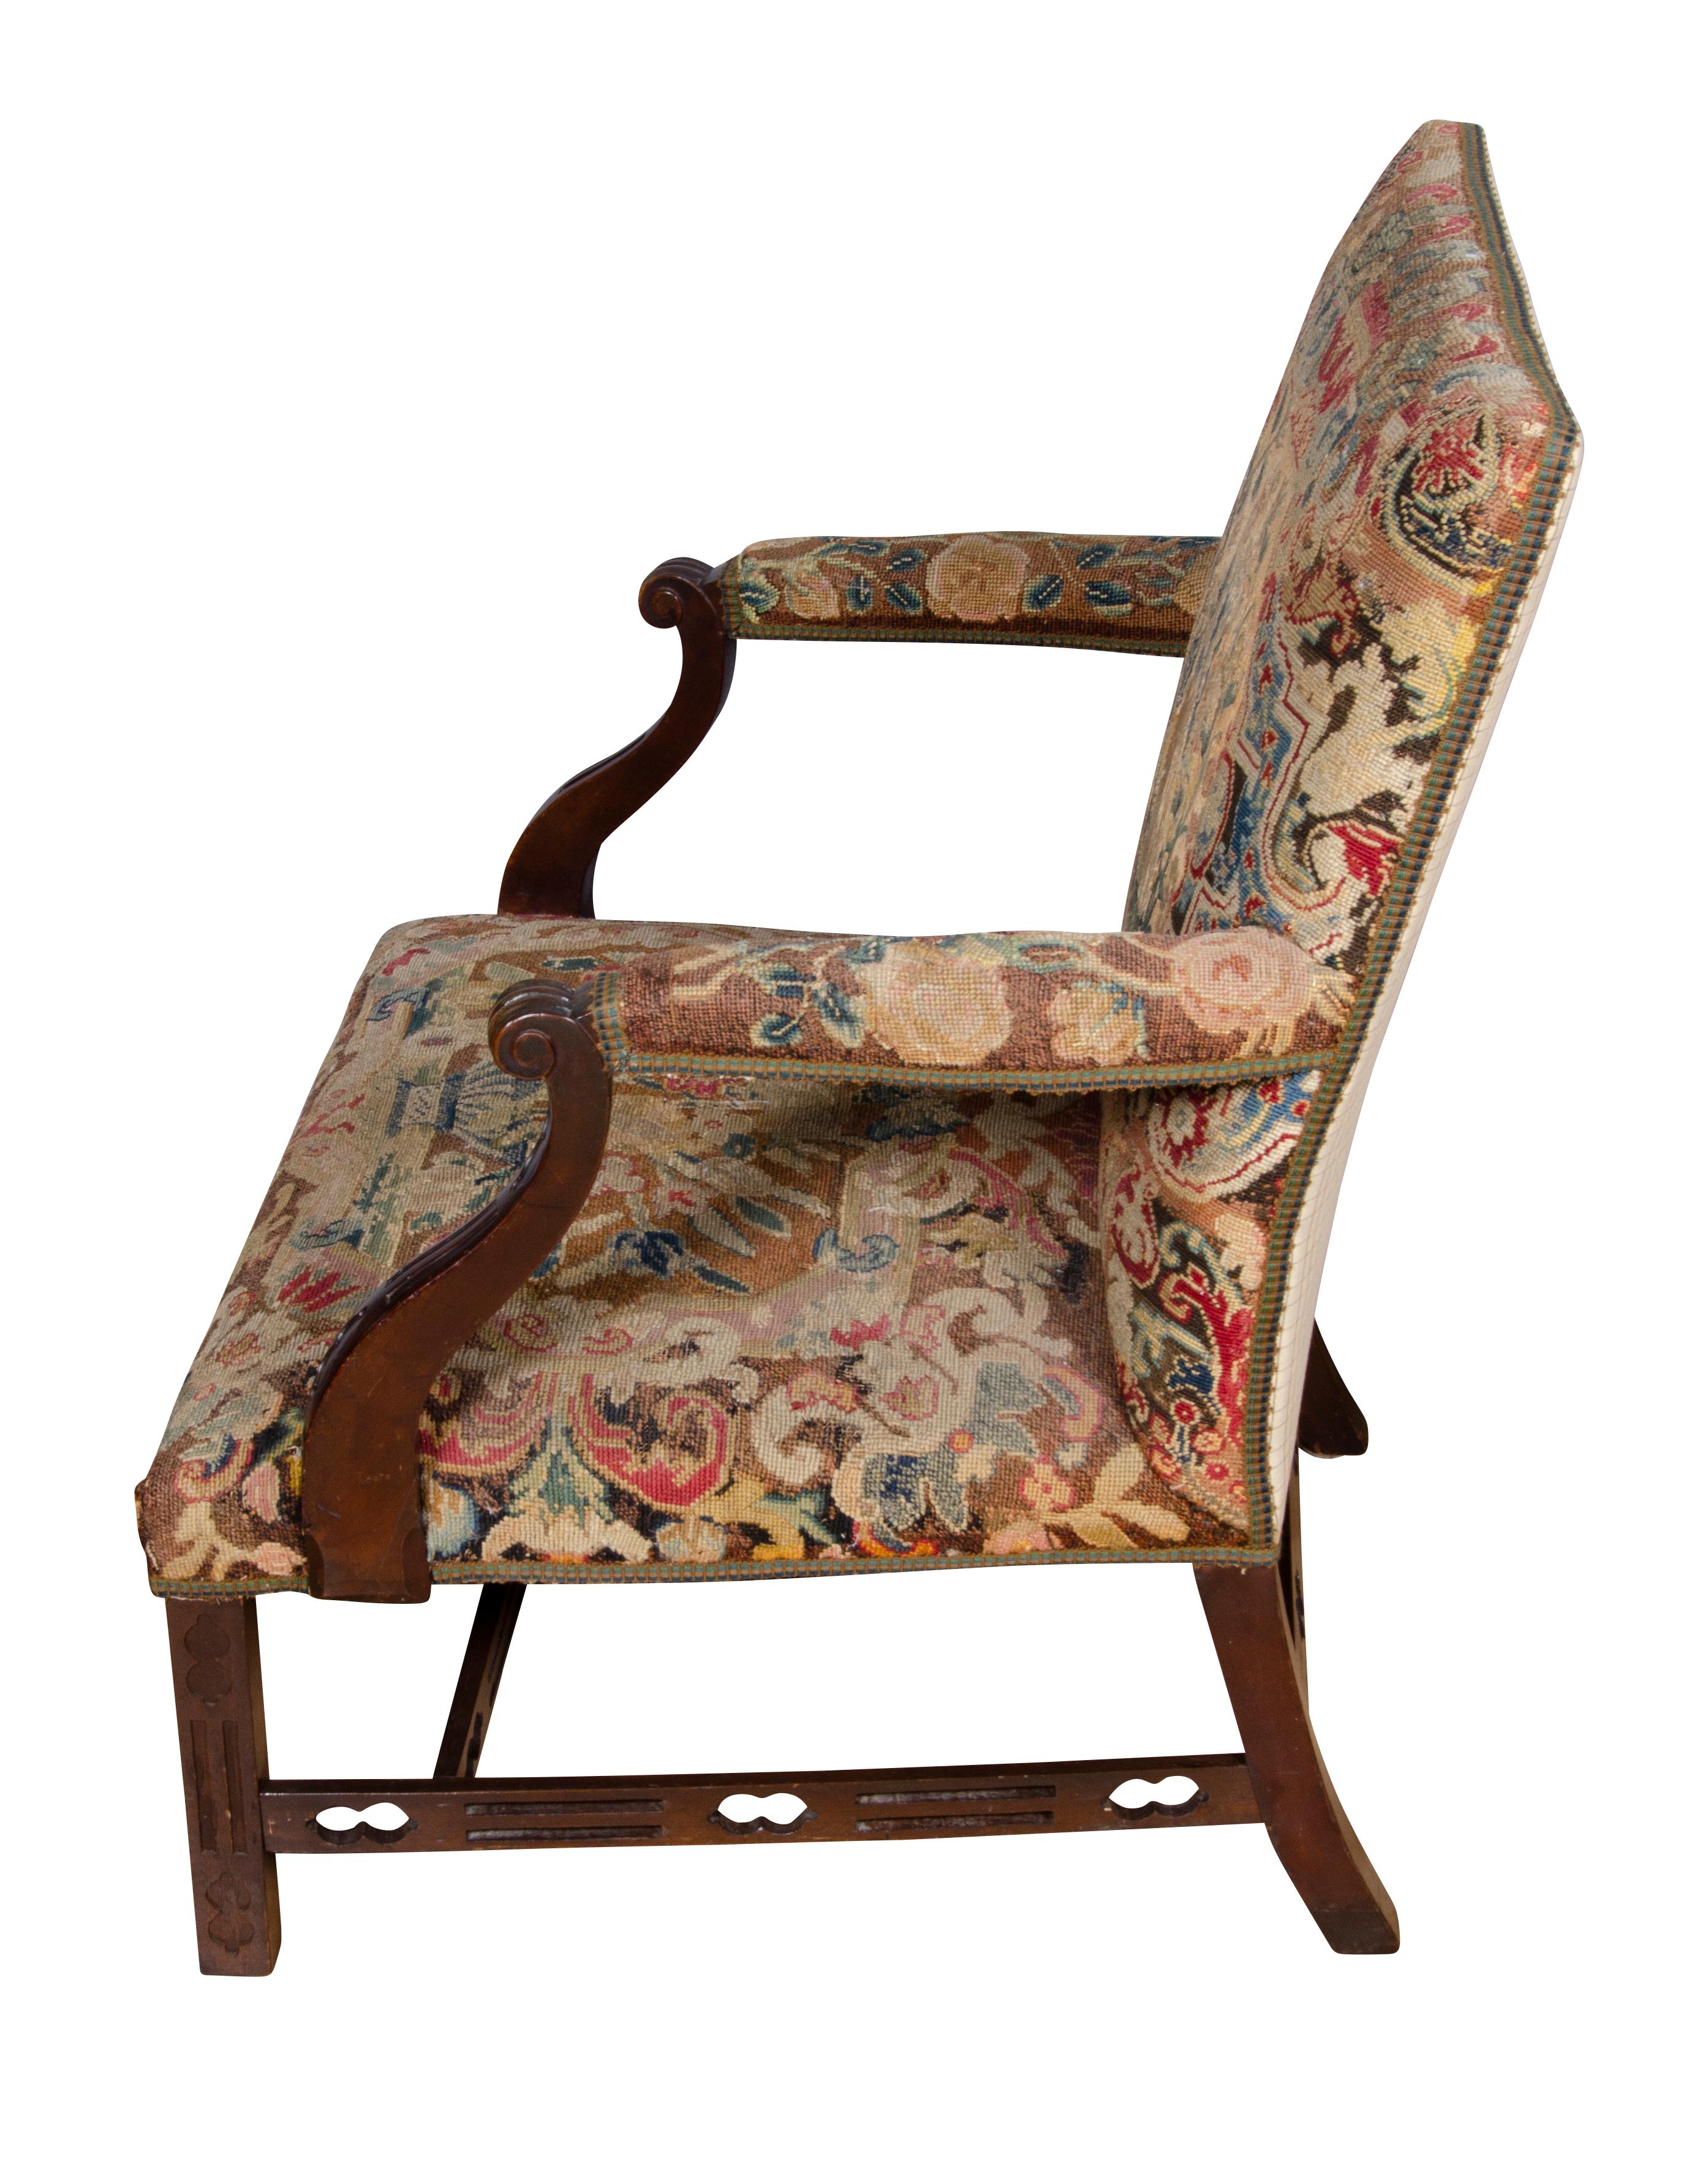 Each with square backs and seats upholstered in needlepoint with down swept arms, raised on square tapered legs joined by H form pierced stretchers.